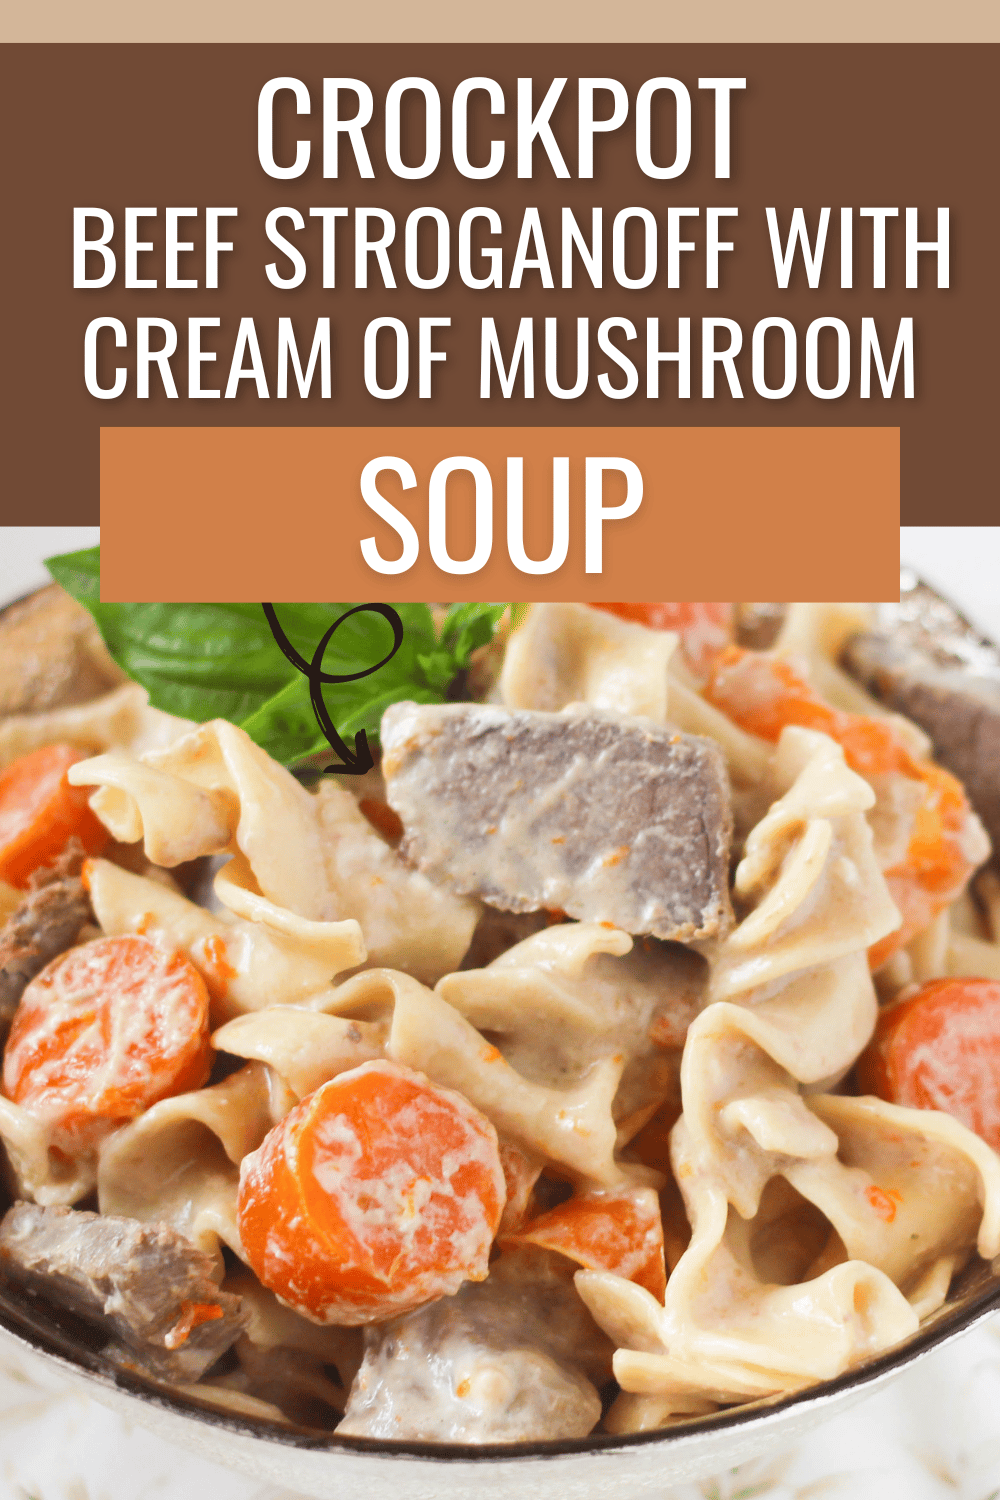 This Crock Pot Beef Stroganoff with Cream of Mushroom Soup is an easy and delicious weeknight meal that the whole family will love! #crockpotstroganoff #beefstroganoffrecipe #beefstroganoff #creamofmushroomsoup via @wondermomwannab